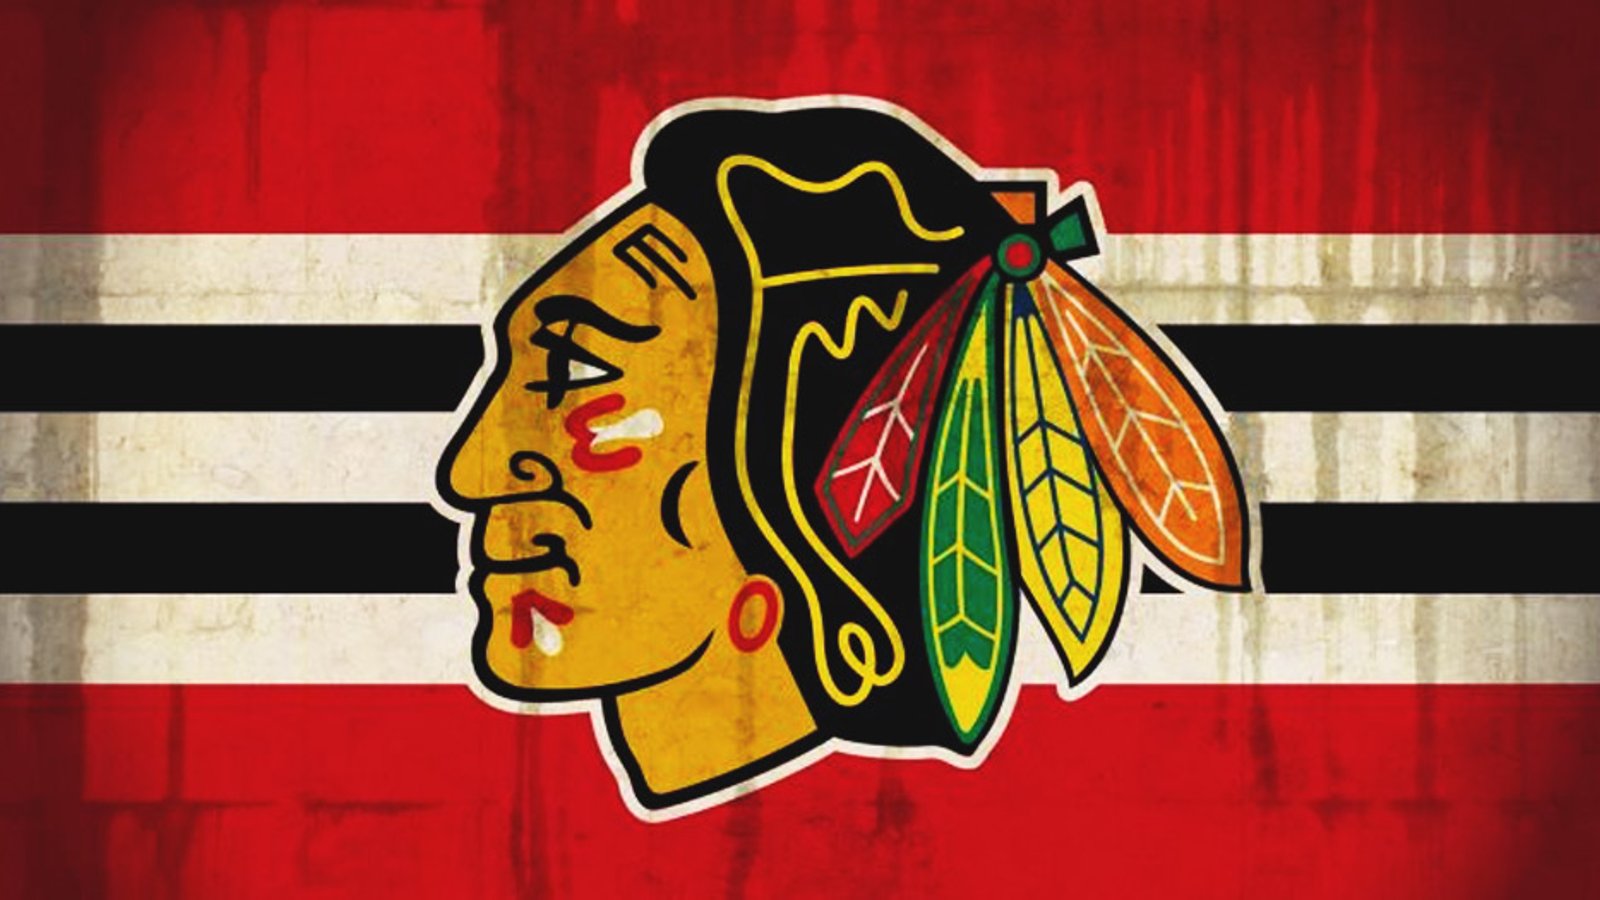 BREAKING: Chicago Blackhawks sign KEY player to two-year extension.